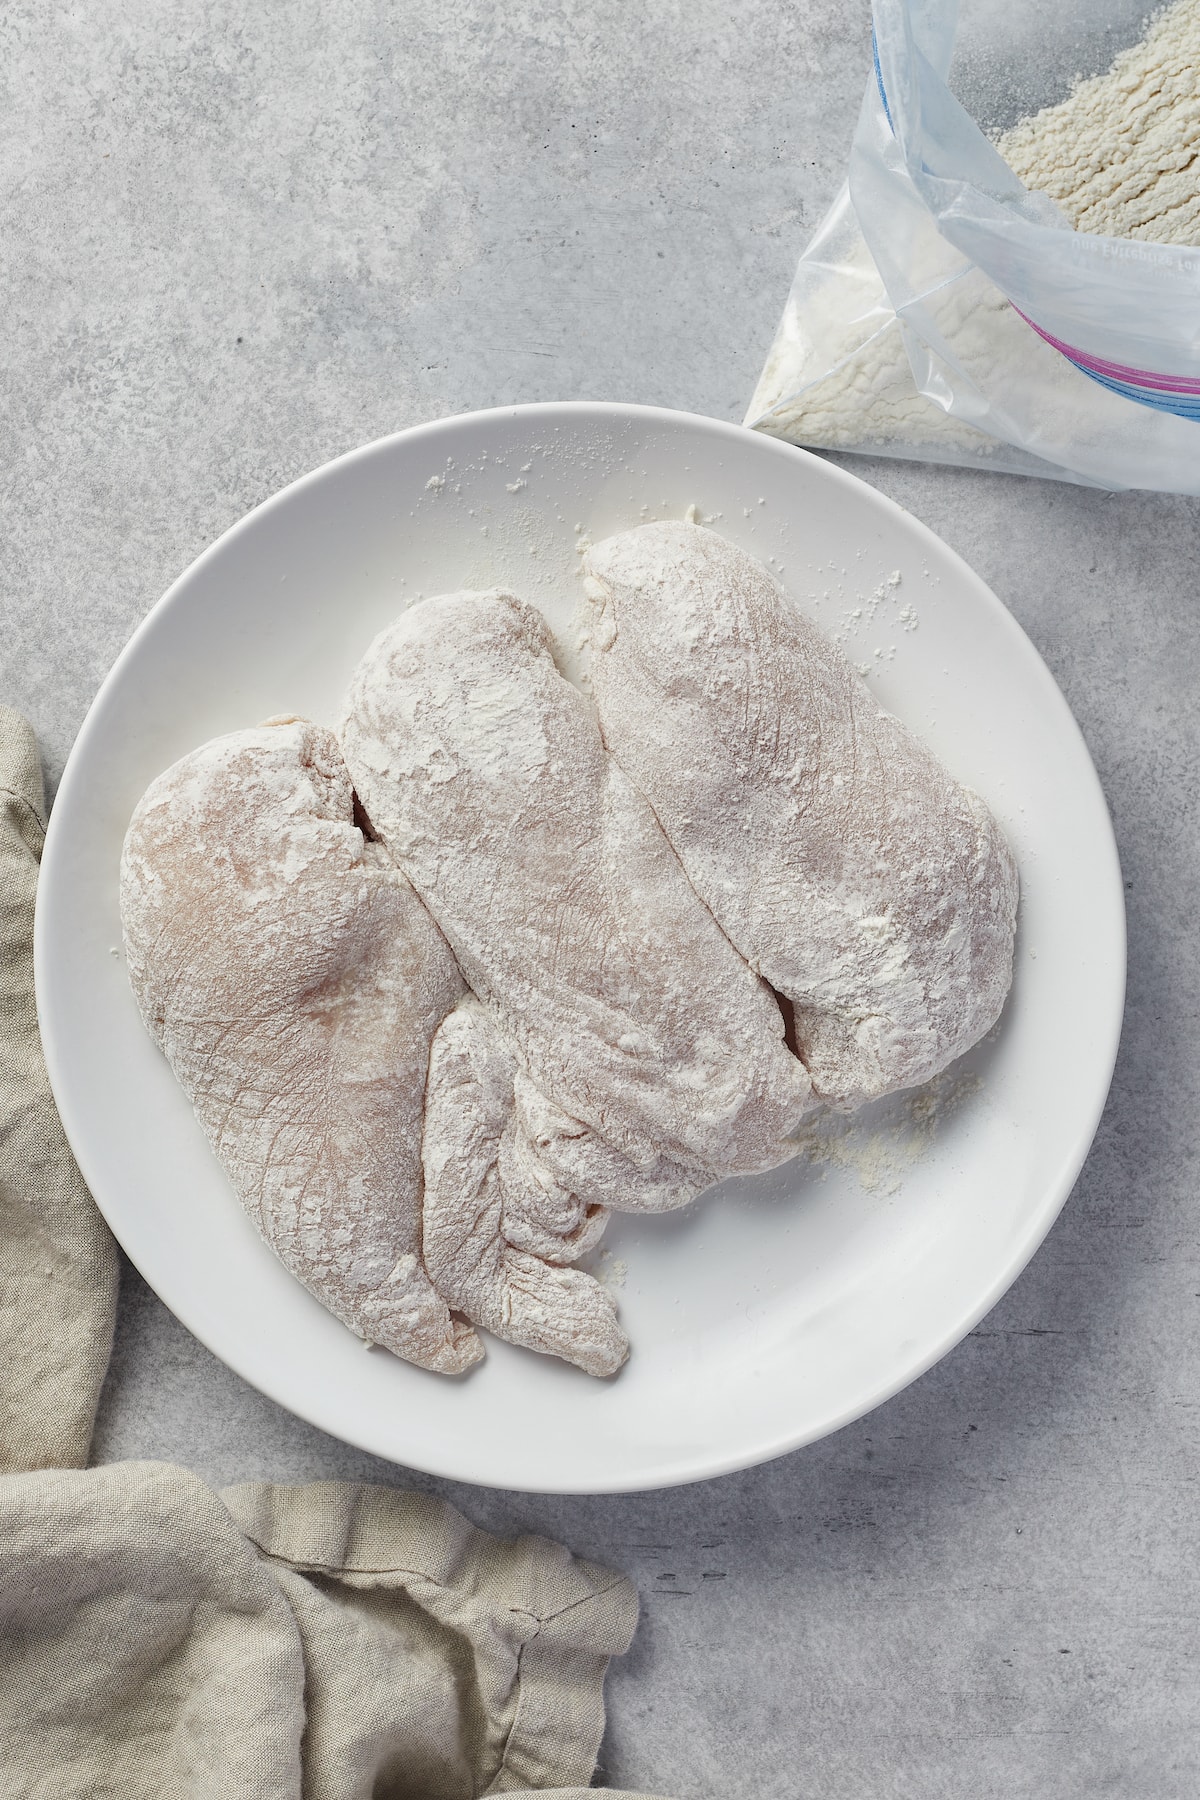 Chicken breasts coated with flour.